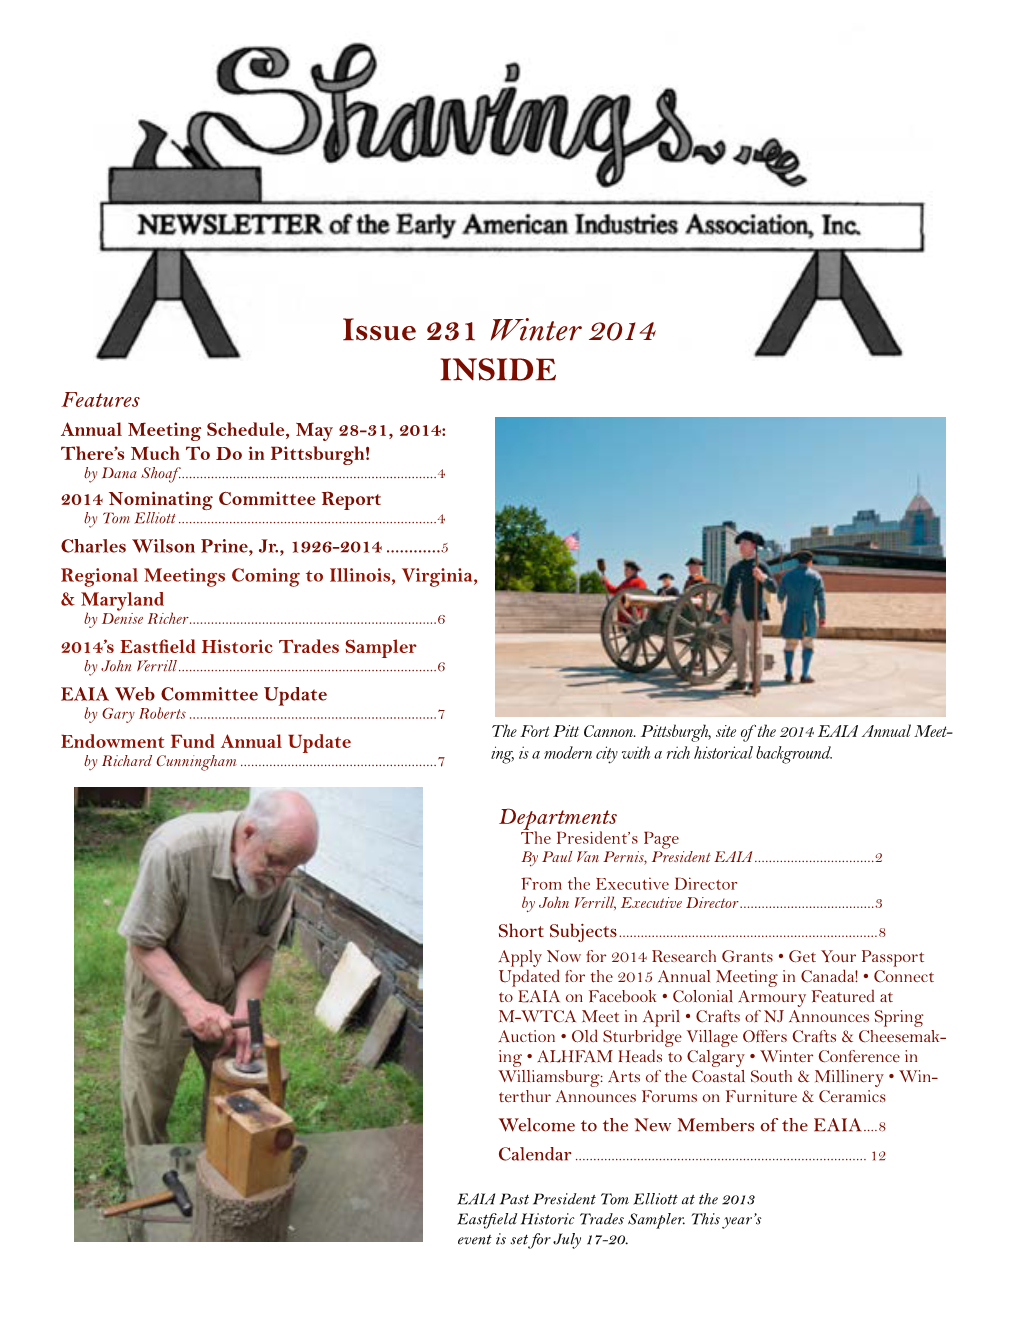 Issue 231 Winter 2014 Inside Features Annual Meeting Schedule, May 28-31, 2014: There’S Much to Do in Pittsburgh! by Dana Shoaf